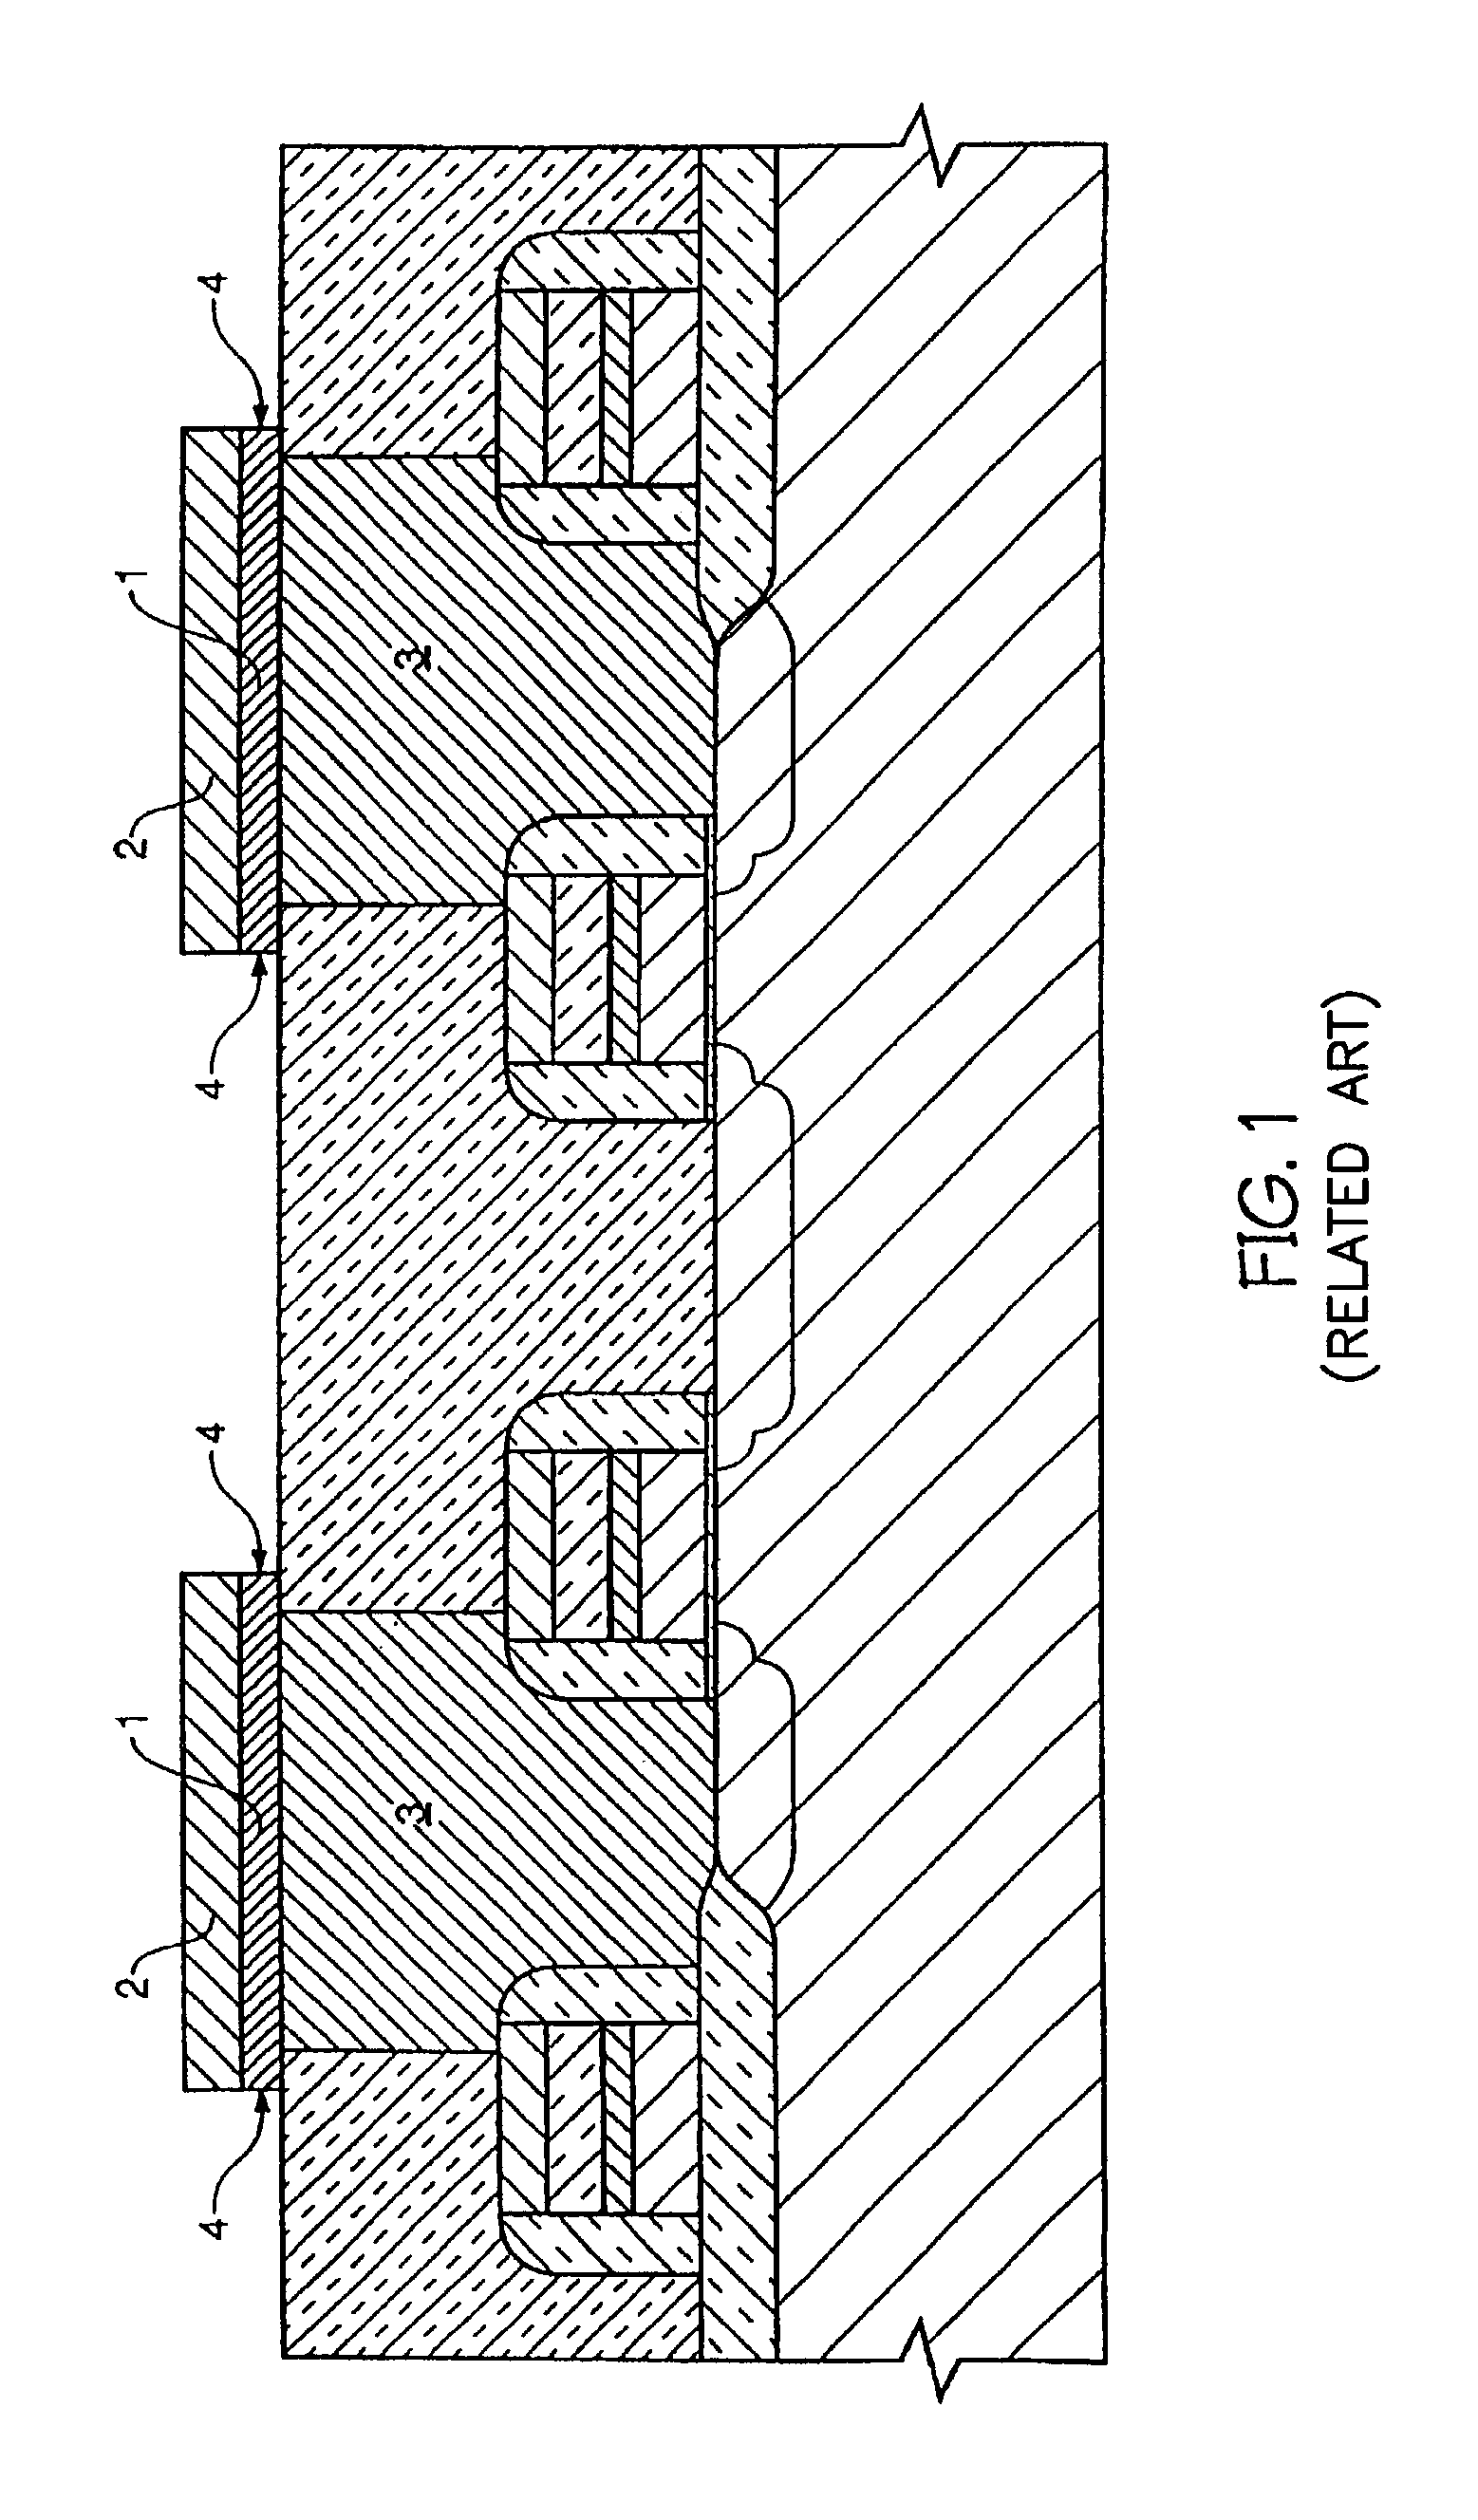 Capacitor compatible with high dielectric constant materials having a low contact resistance layer and the method for forming same